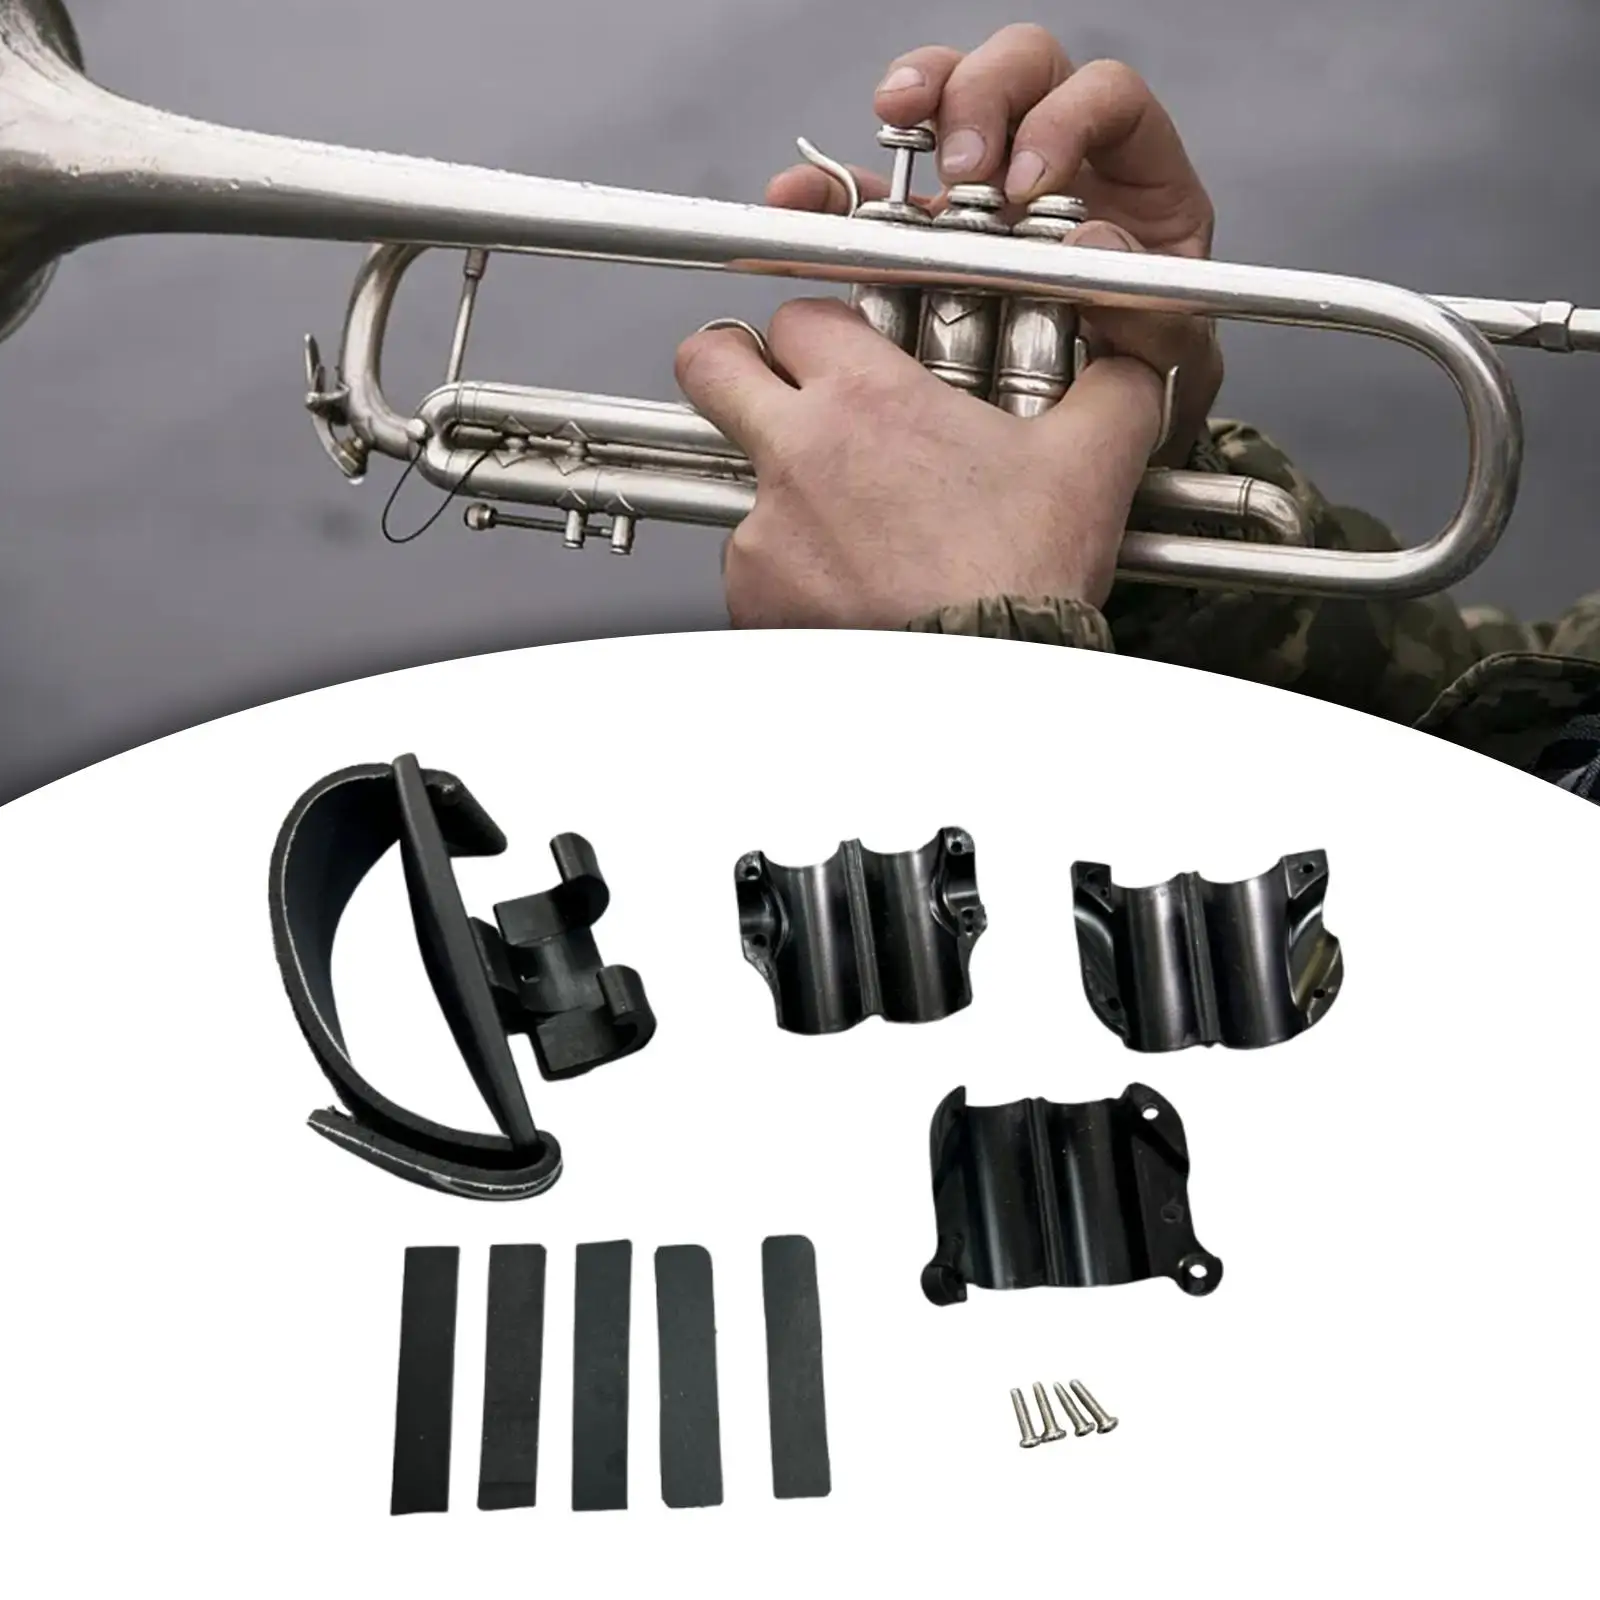 Trombone Grip Maintain A Proper Playing Position Comfortable Universal Guard Practical Cleaning Care Parts Black Wraps